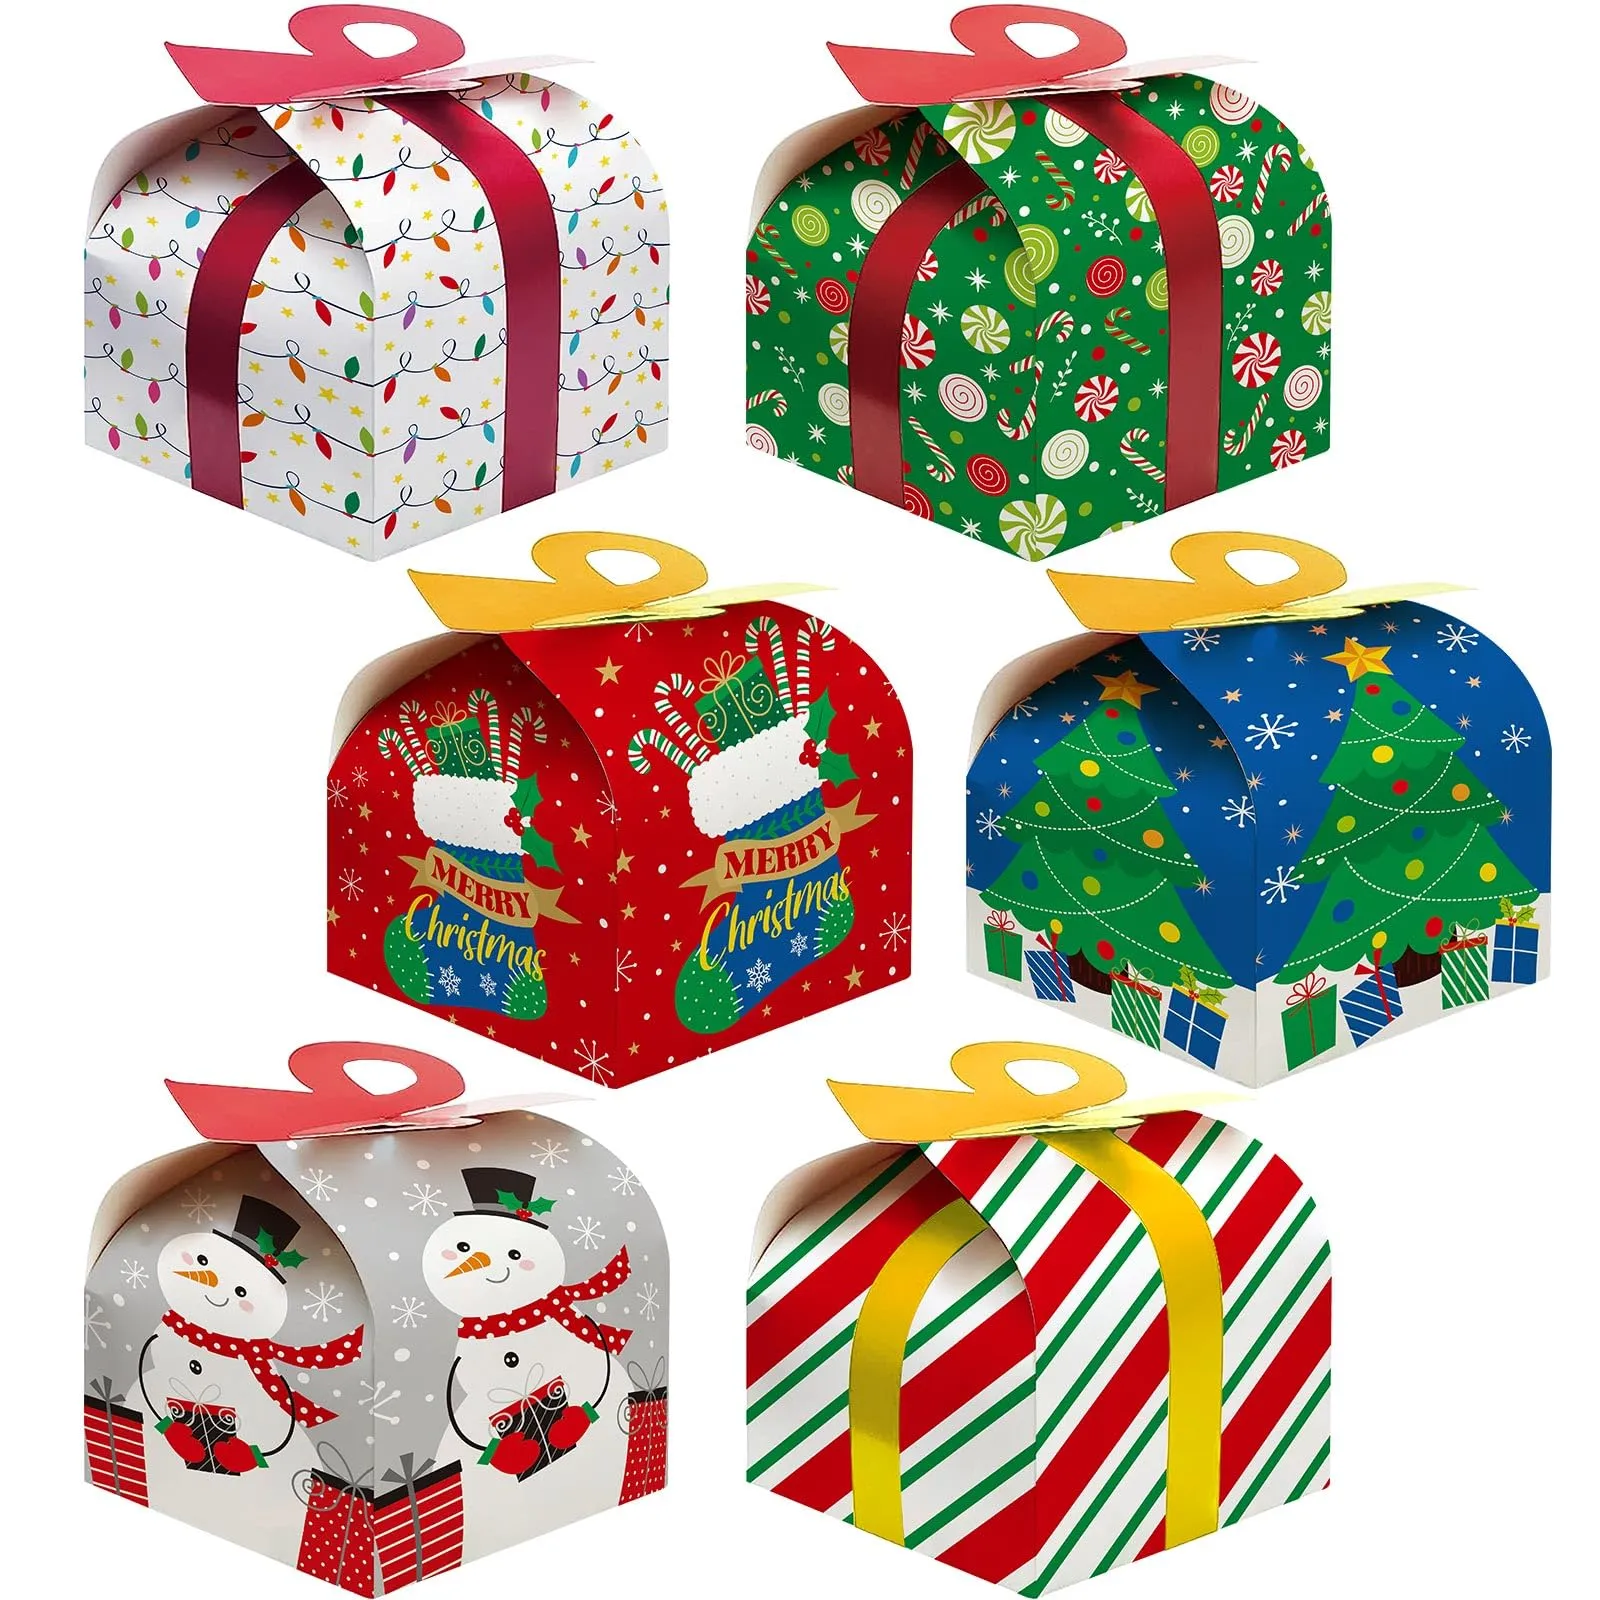 3d christmas treat boxes goody candy boxes with handles cardboard goody gift boxes with vibrant print for chocolate cookie wrapping holiday xmas party supplies favors cute style